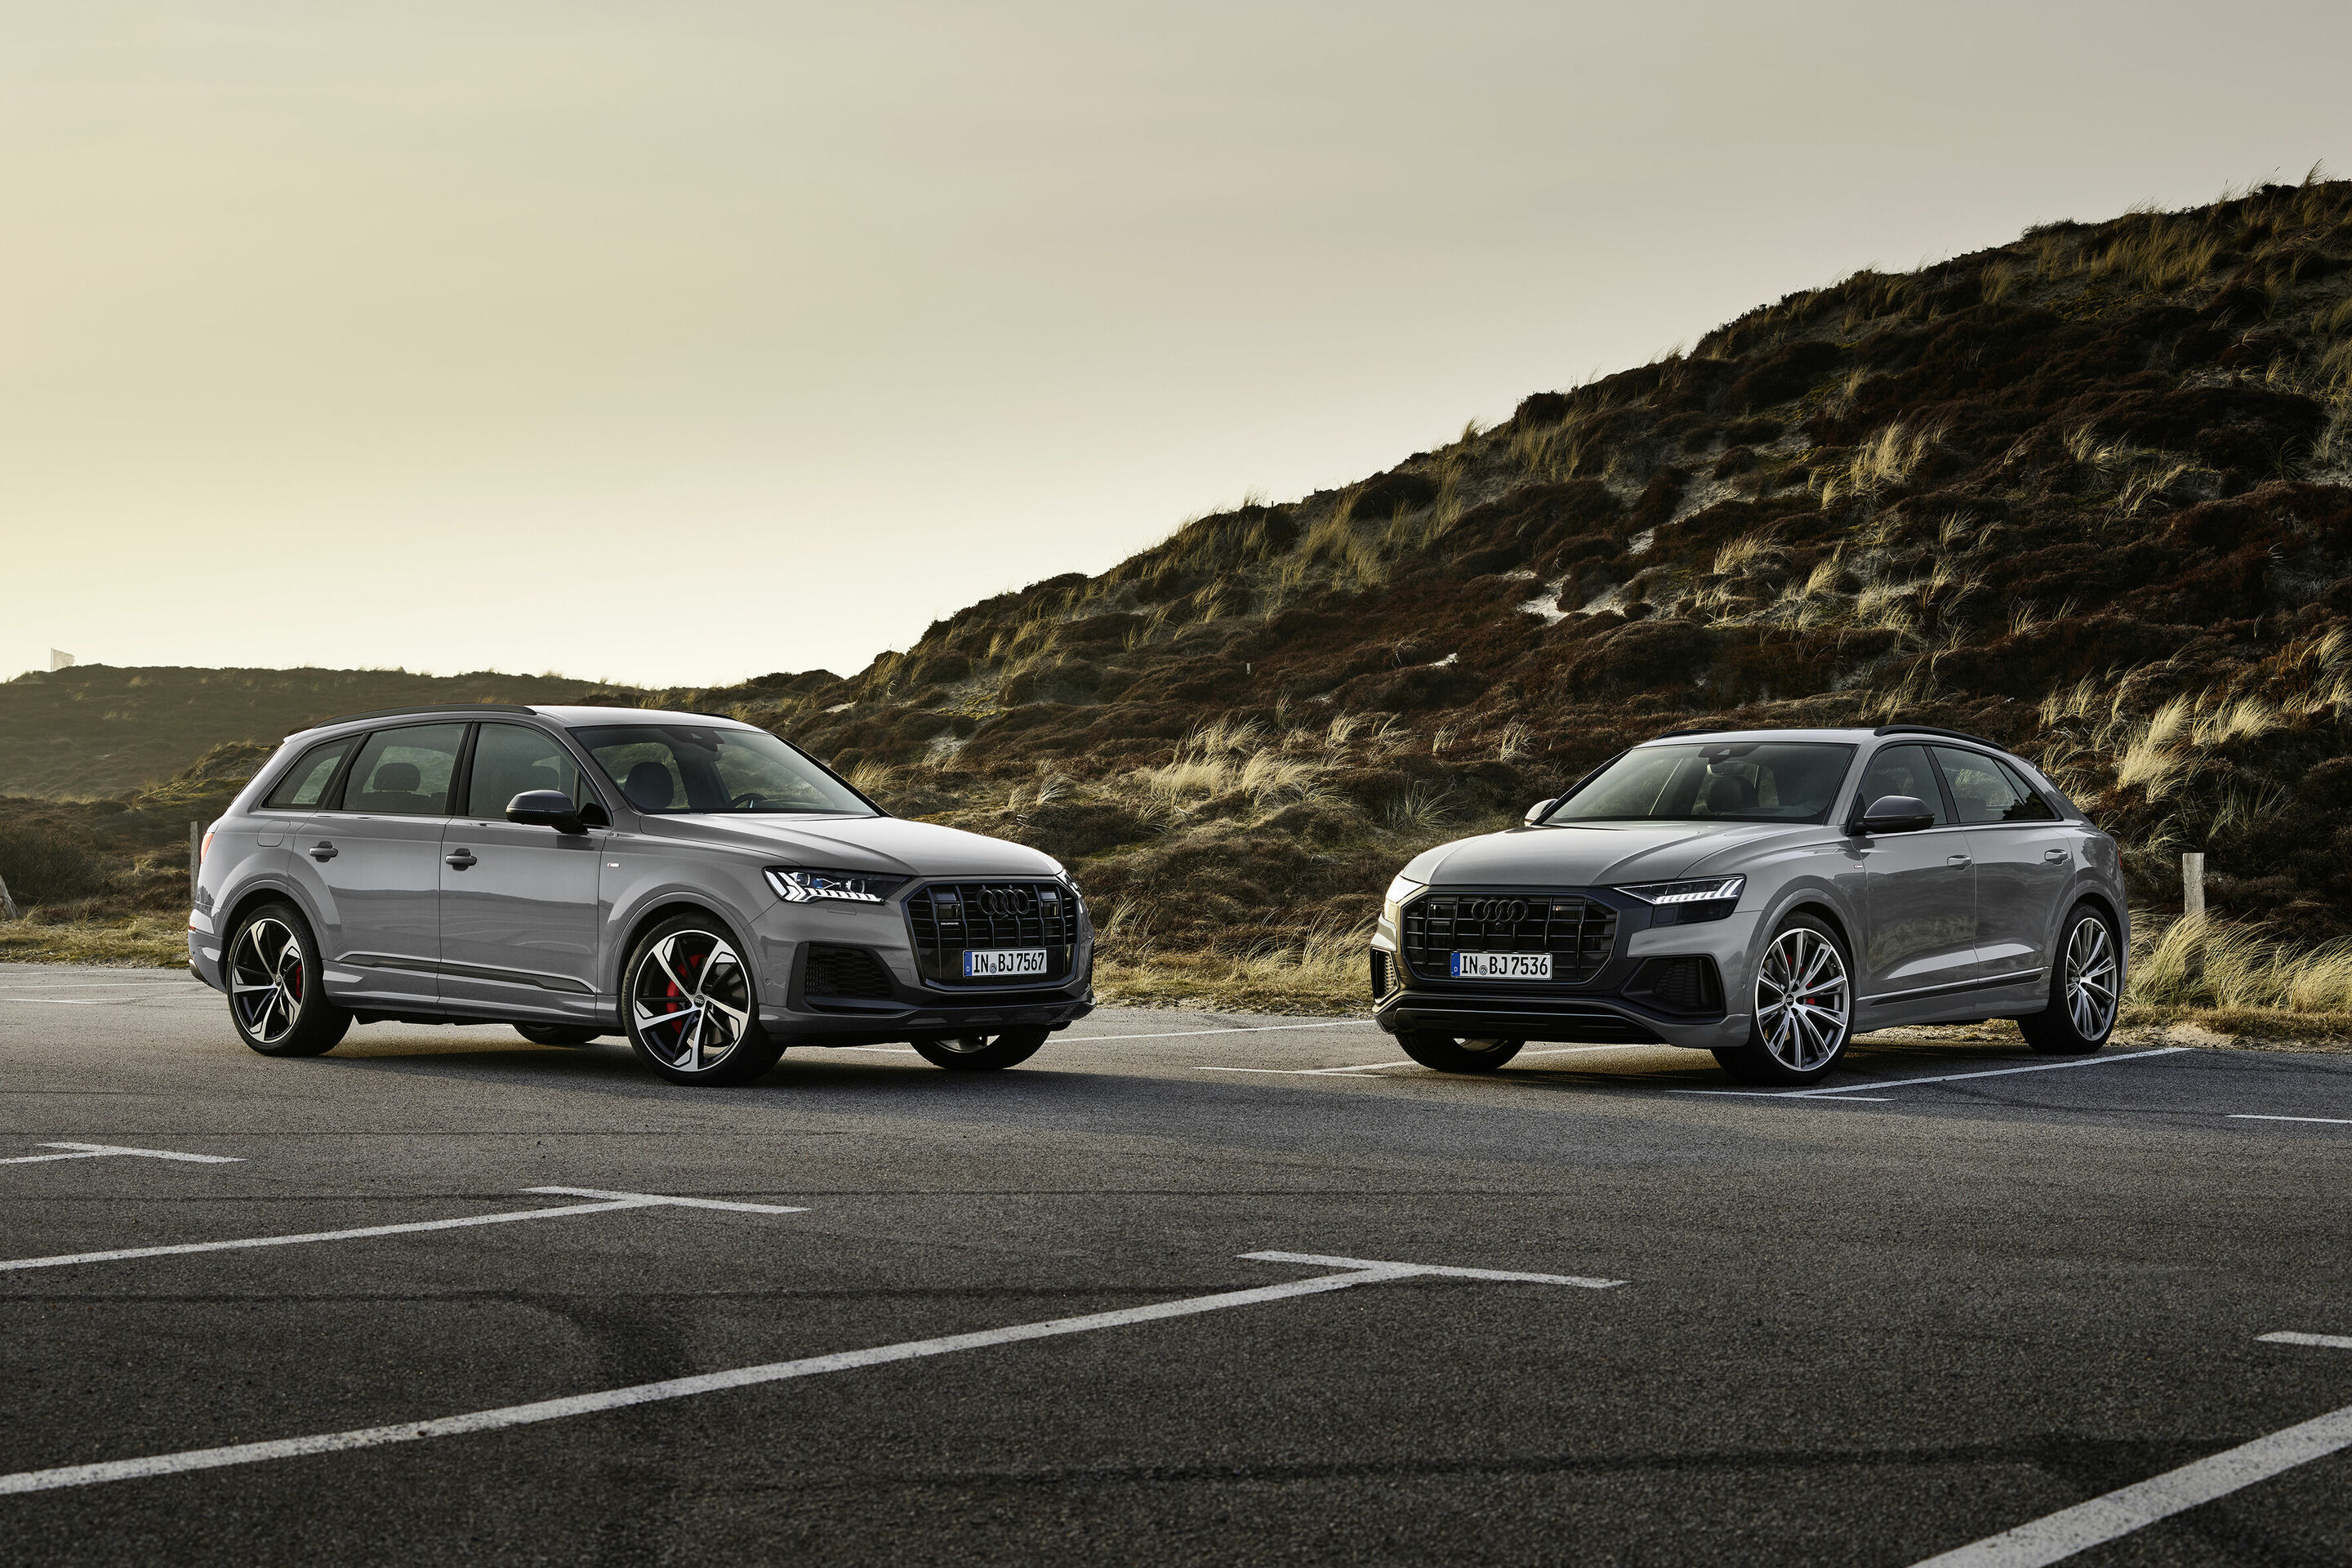 Refined details: Audi gives the A1, A4, A5, Q7 and Q8 a sporty new look for the new model year